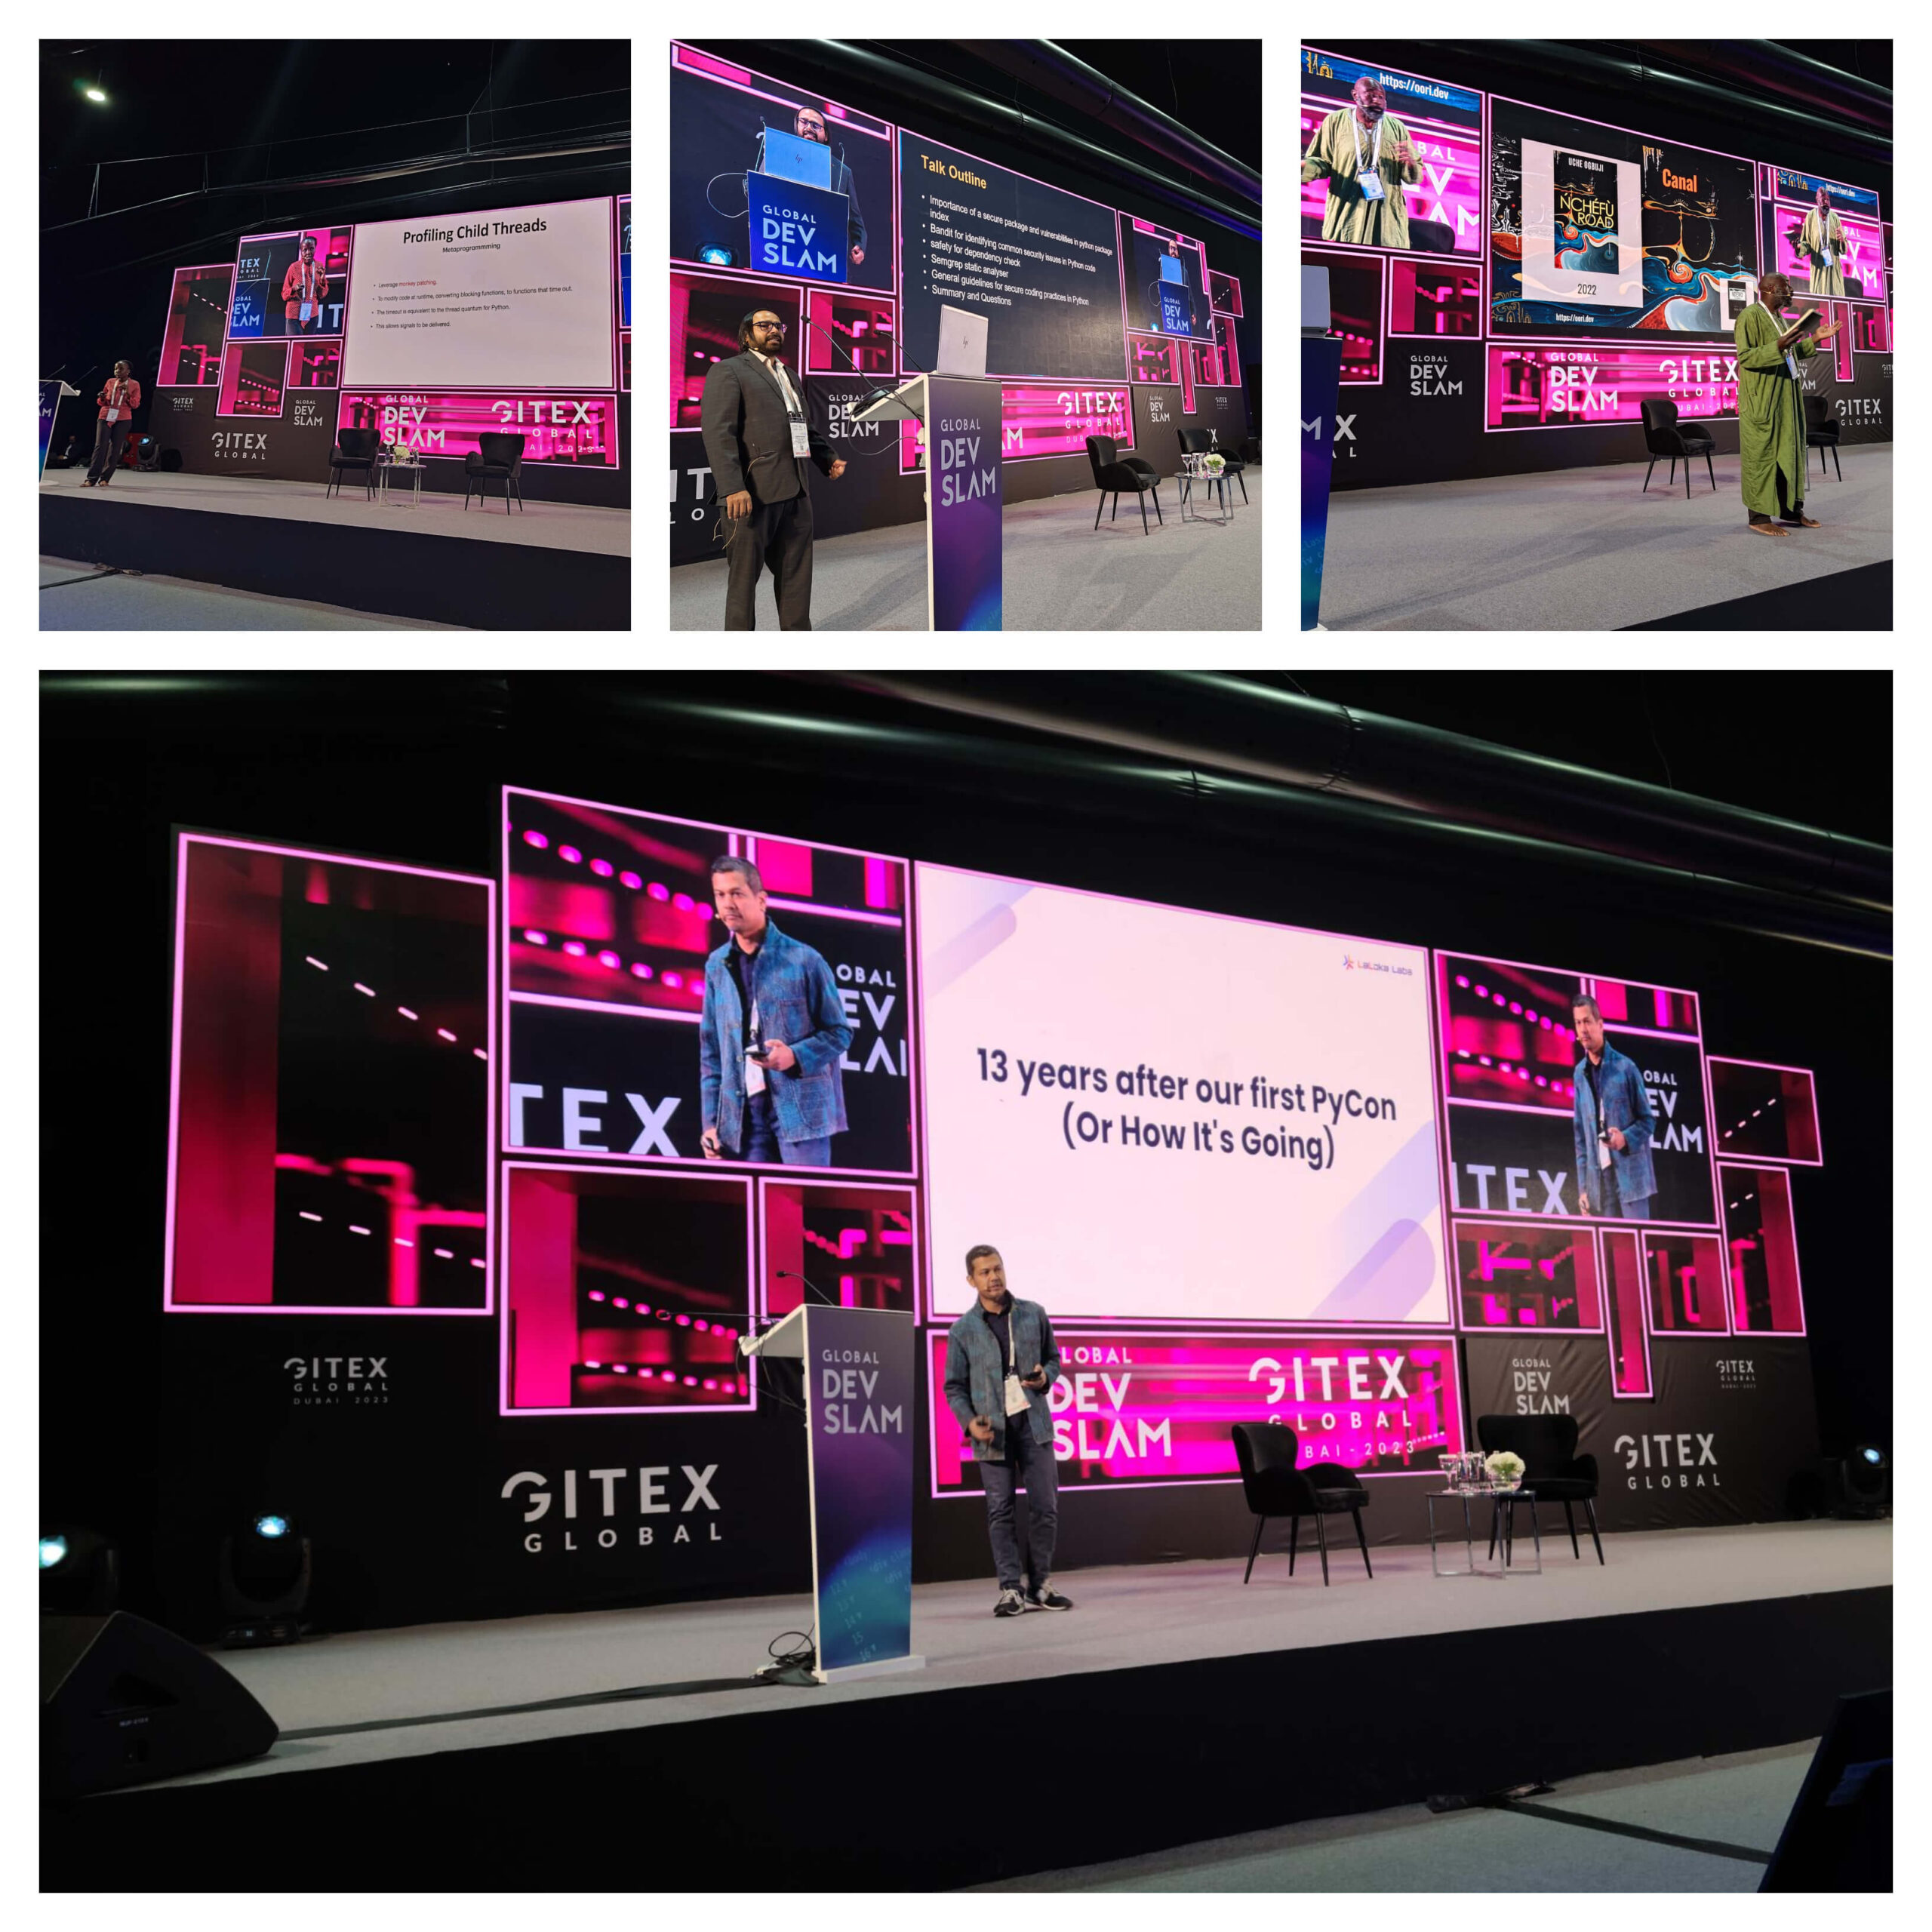 A collage of pictures of people giving talks on a stage with GITEX Global set up in the background